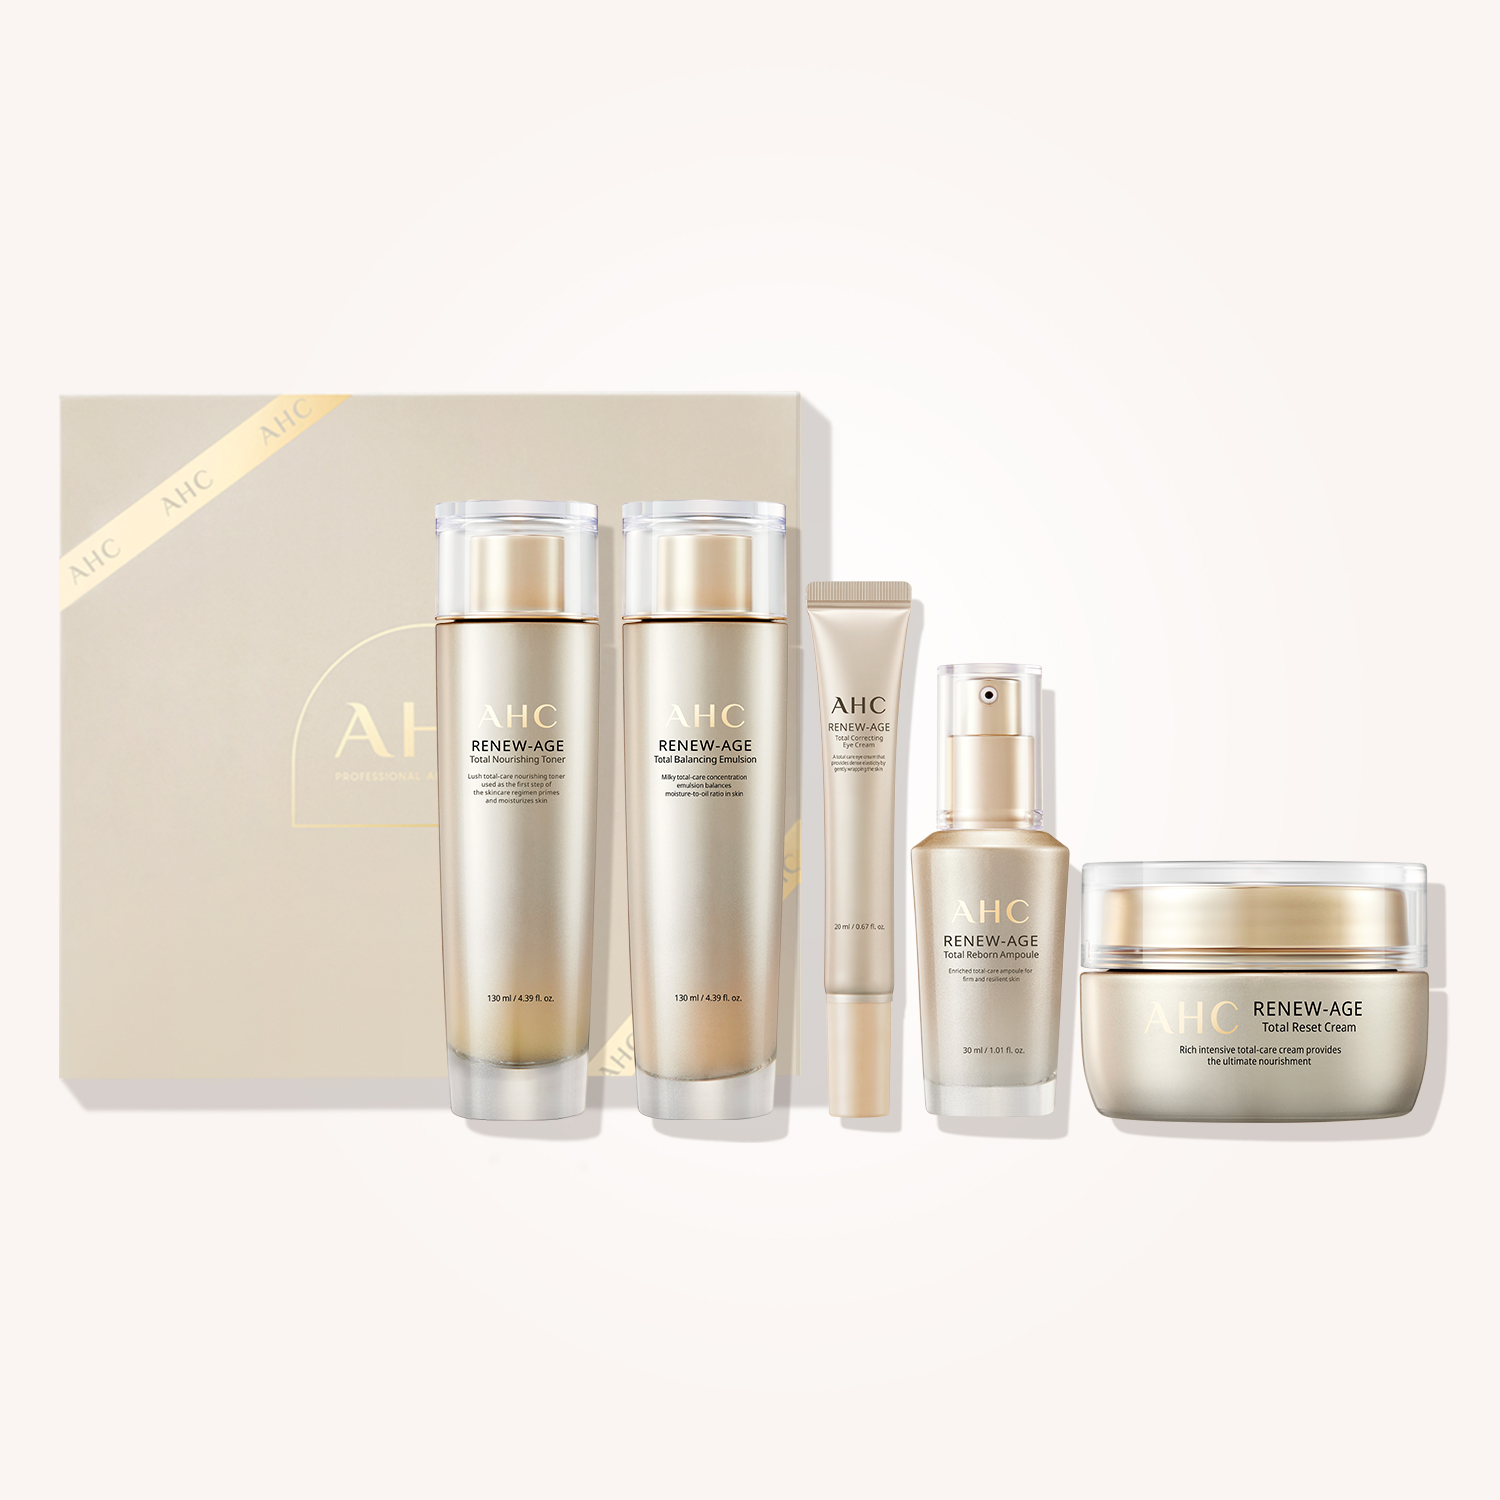 AHC Renew Age Total Skincare Gift Set